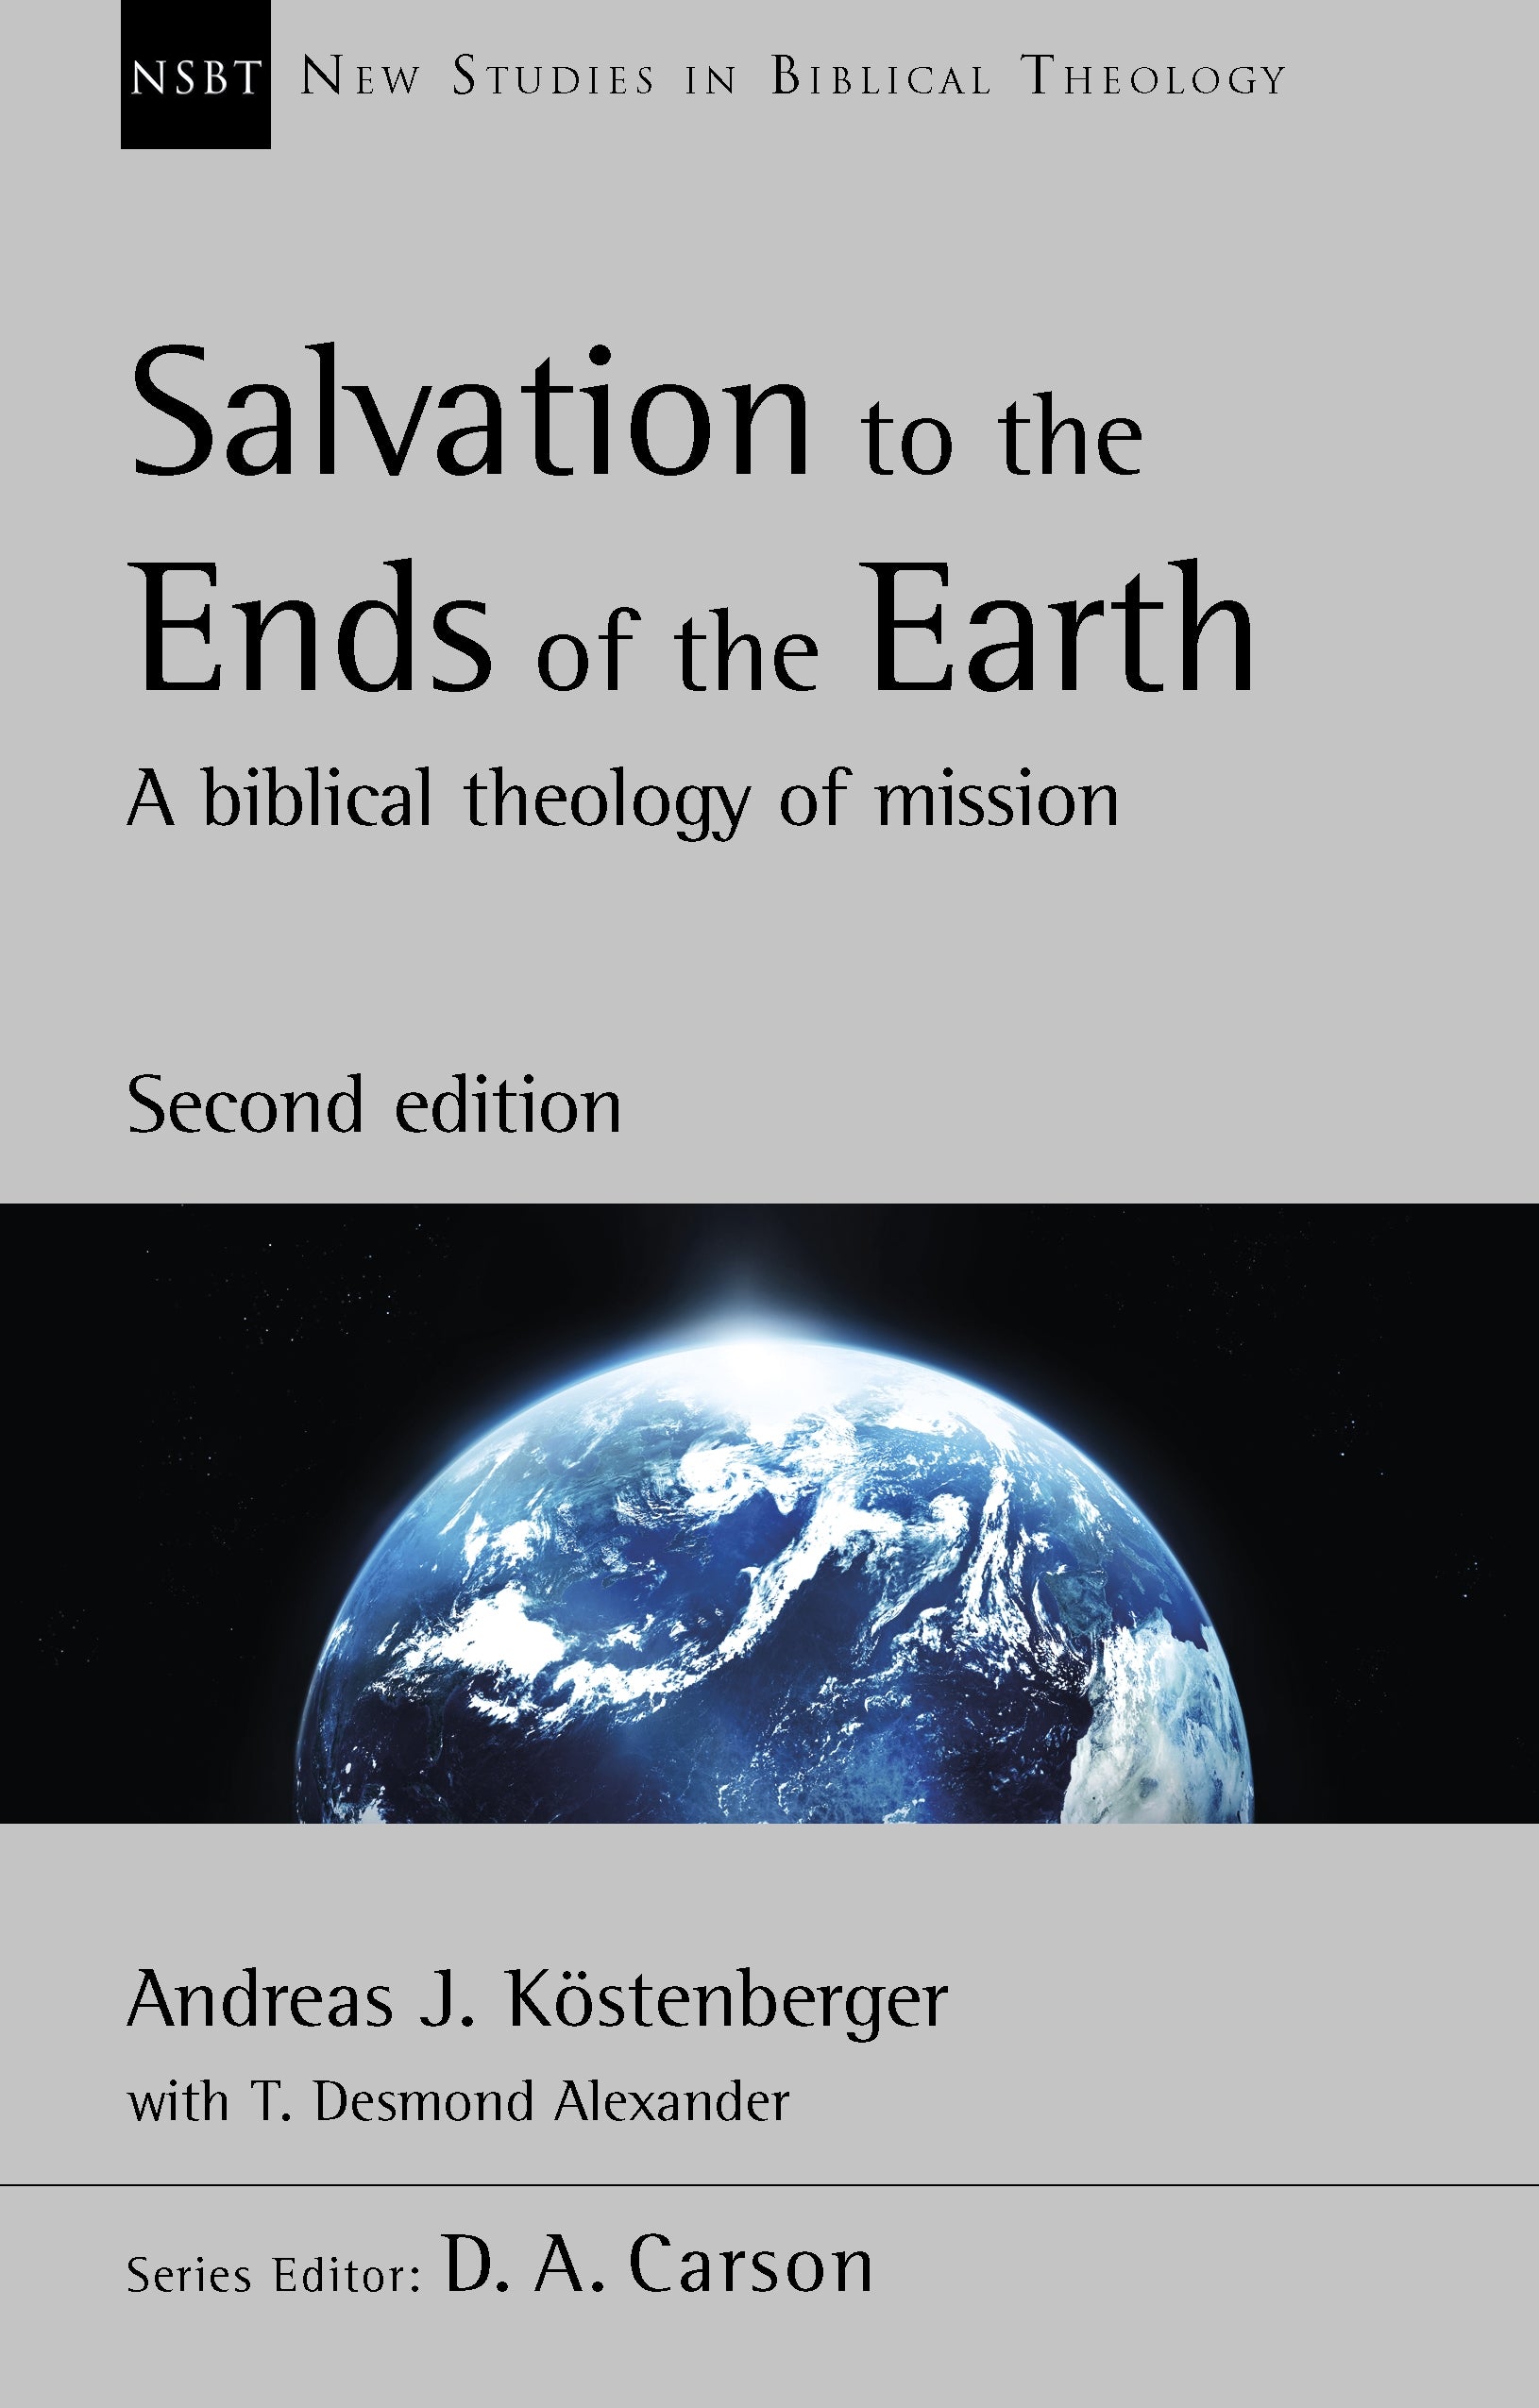 Image of Salvation to the Ends of the Earth other